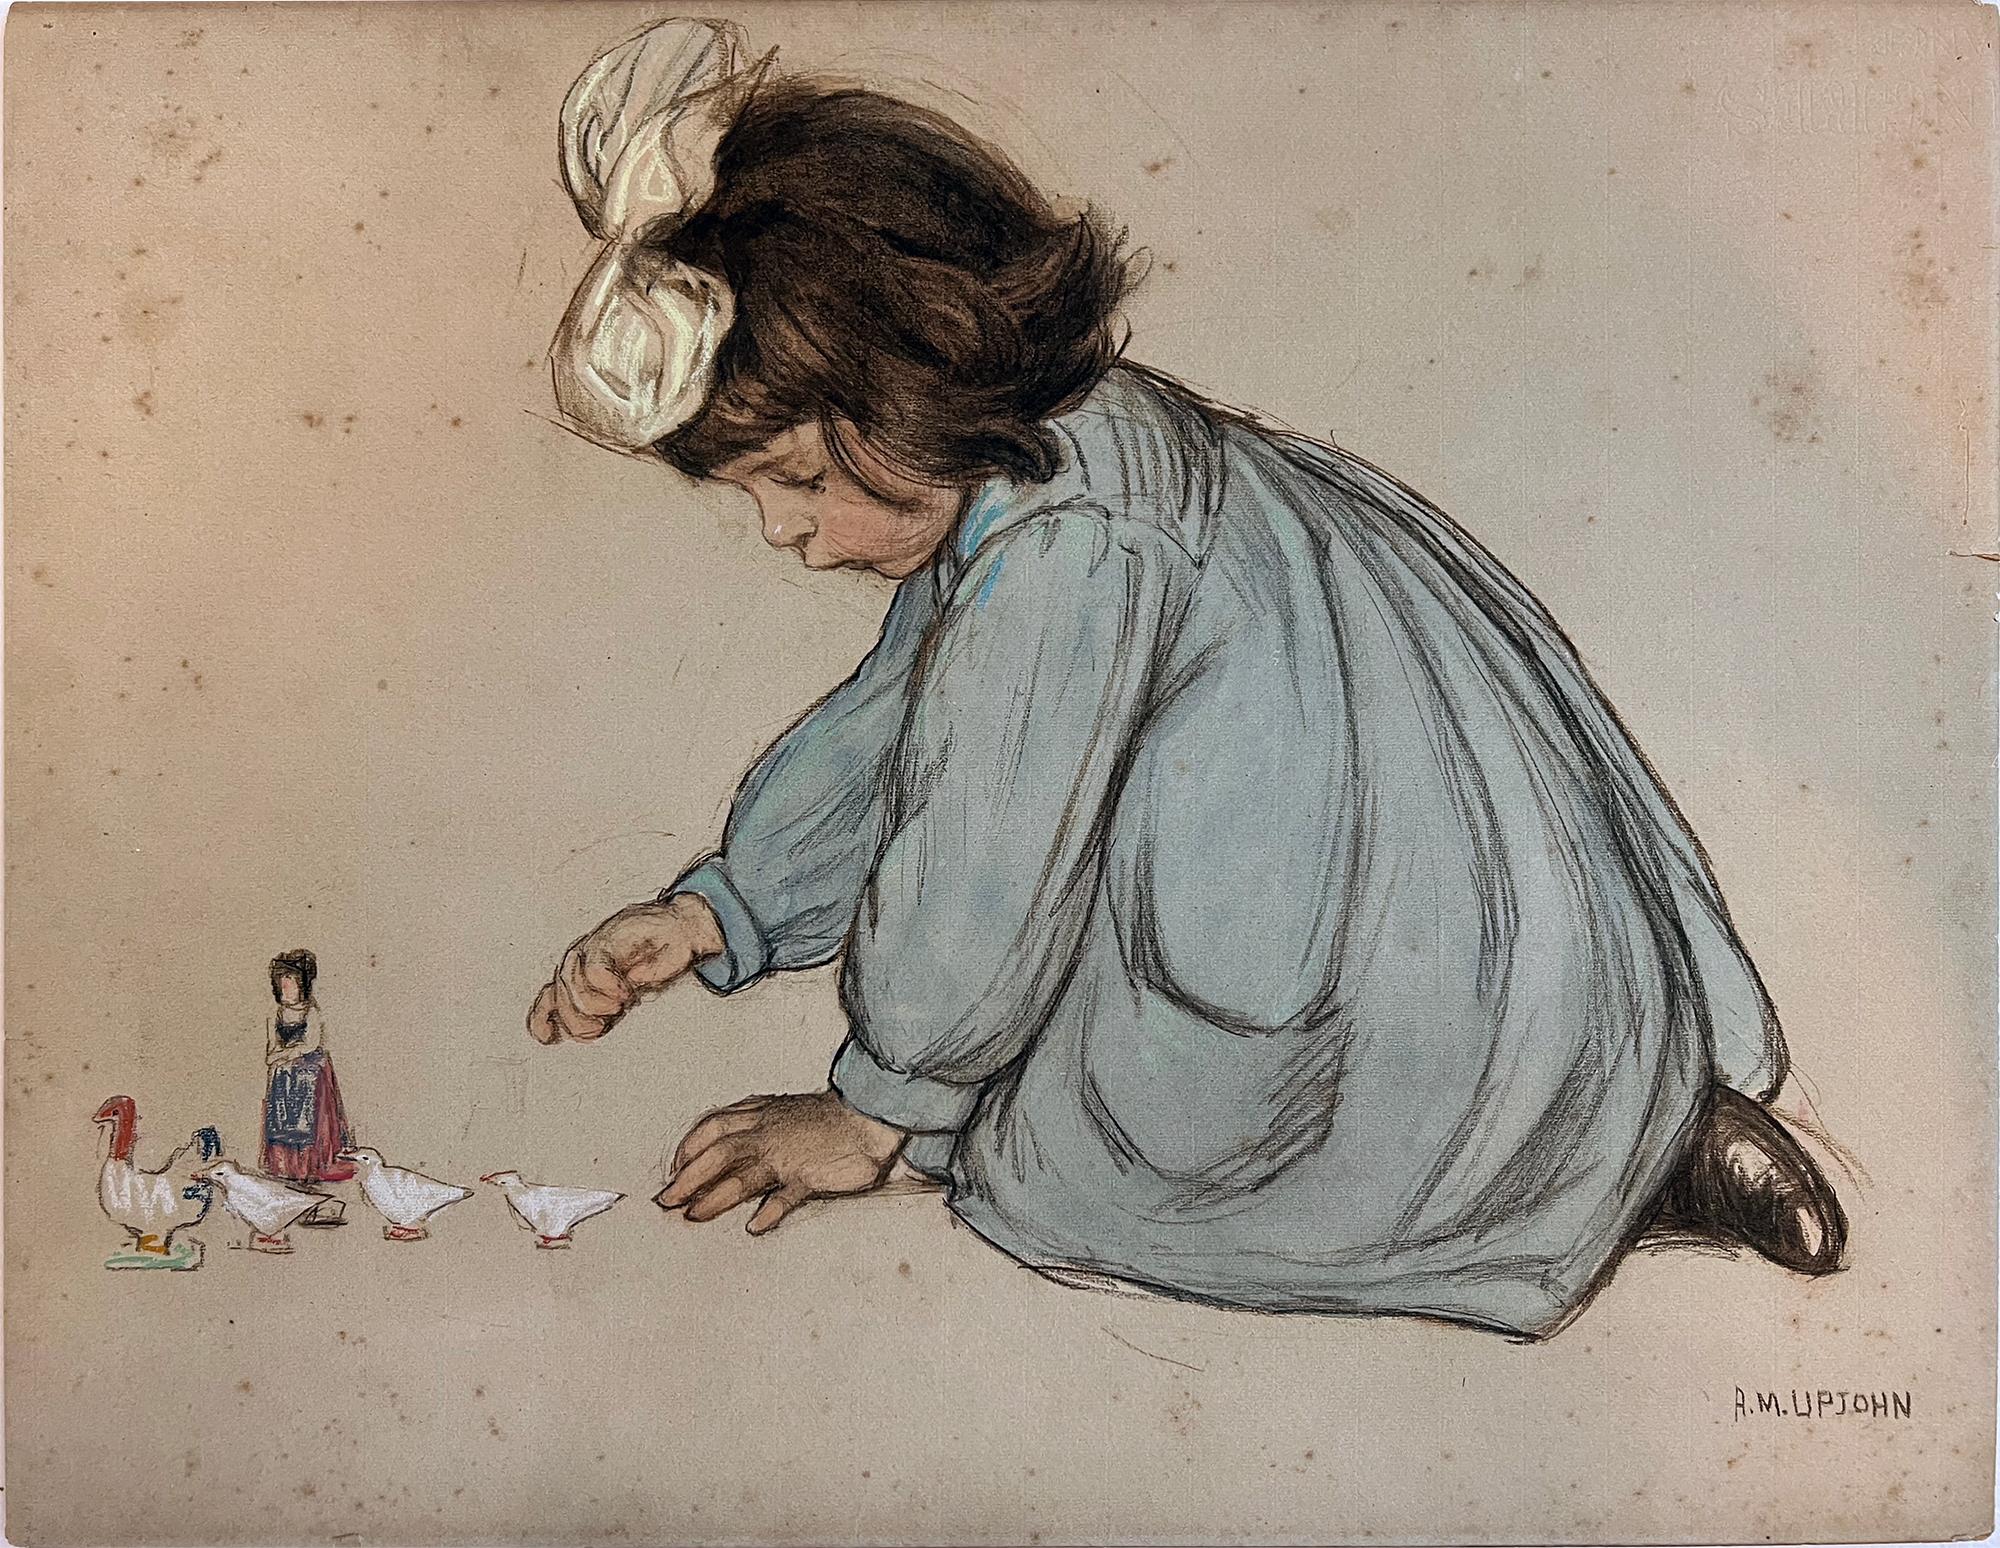 Anna Milo Upjohn Figurative Painting - Child Playing with Toy Birds and Doll - School of Jessie Willcox Smith